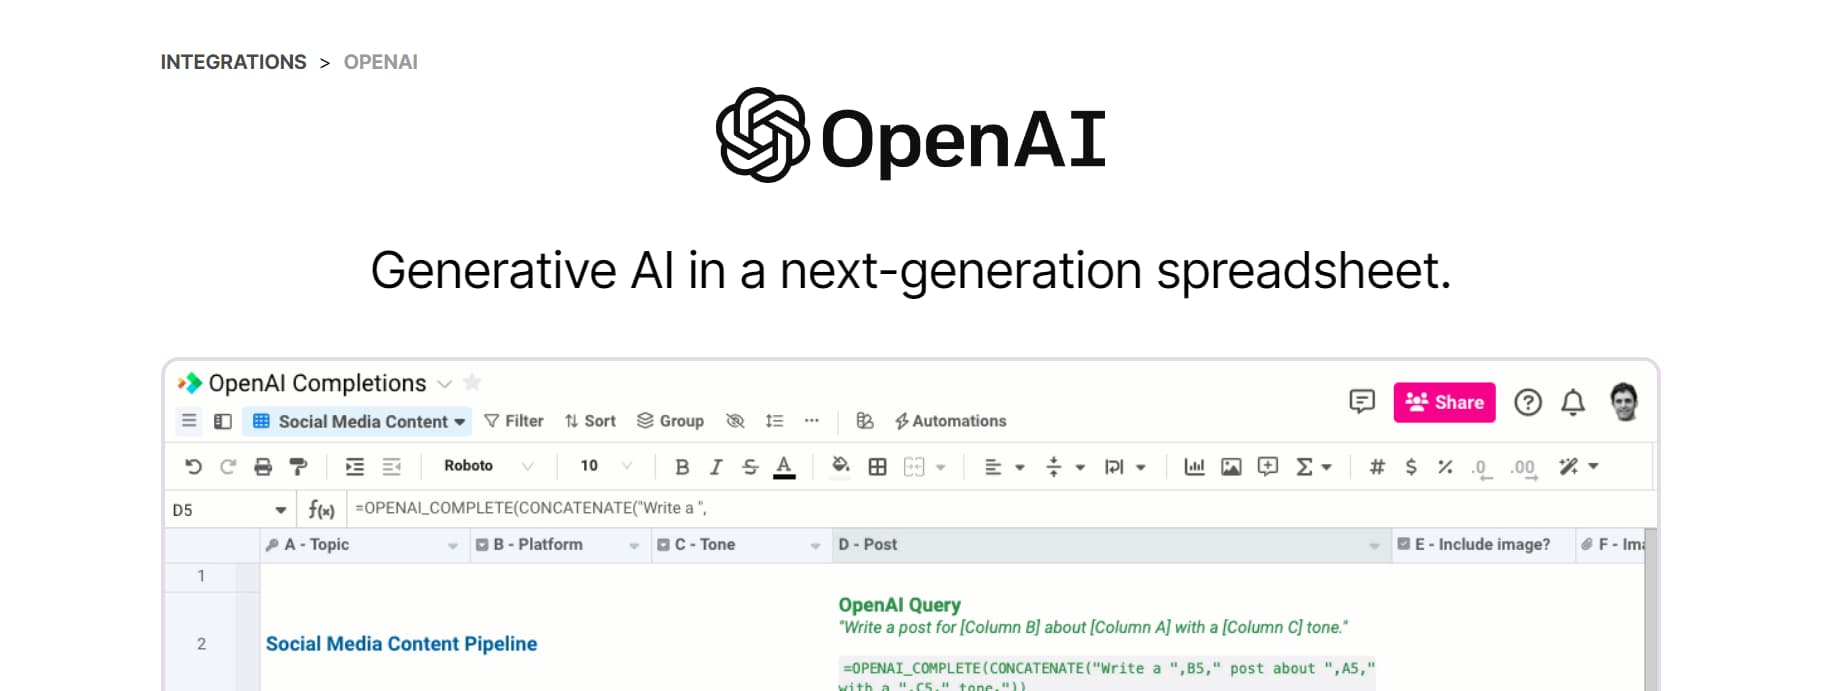 OpenAI In Spreadsheet Tool Review